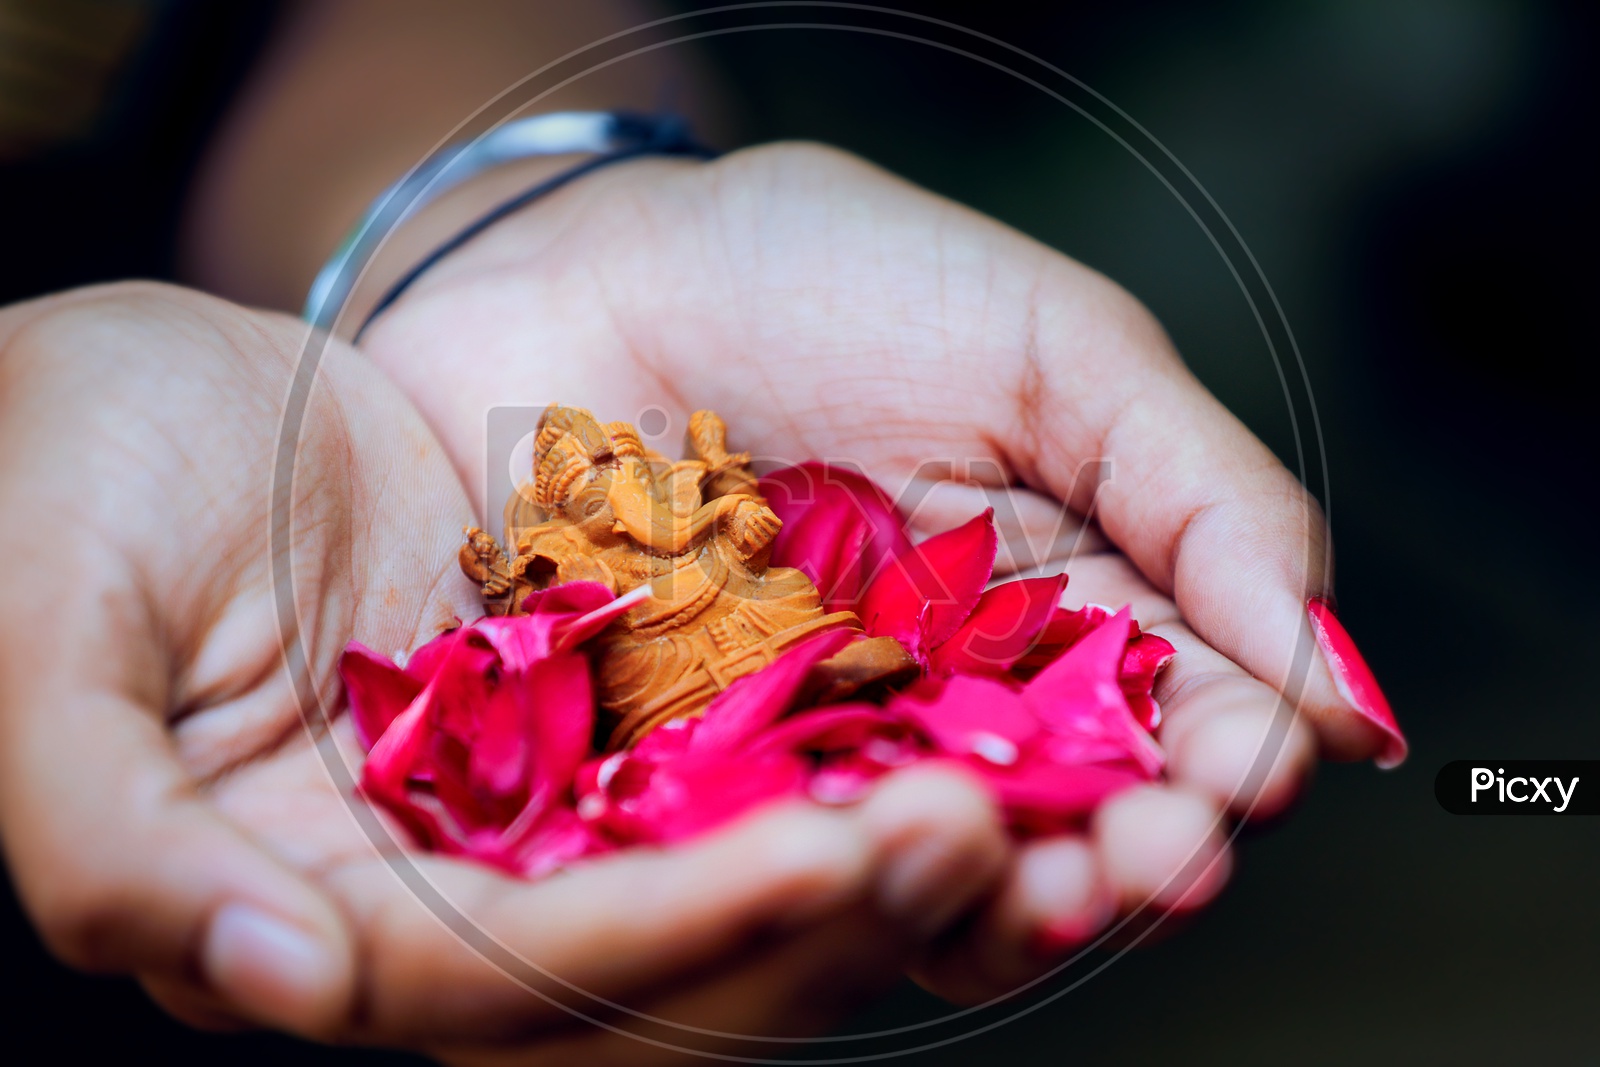 Ganesh Idol placed in hands with  beautiful flowers